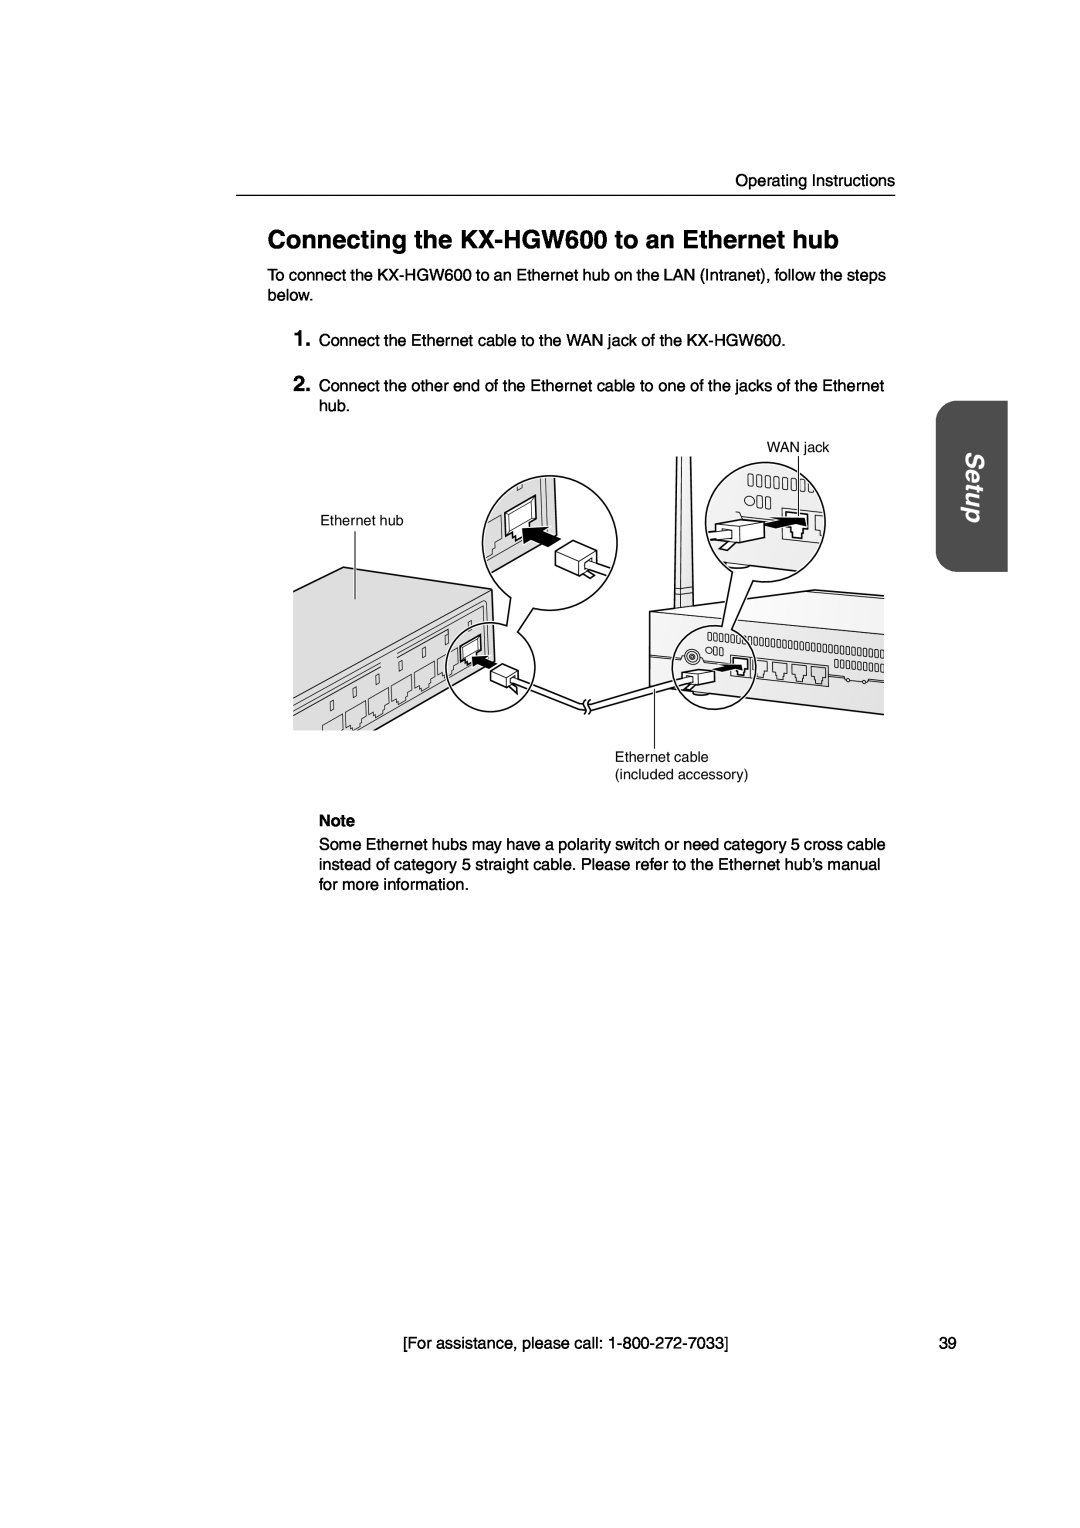 Panasonic Connecting the KX-HGW600 to an Ethernet hub, Setup, WAN jack Ethernet hub Ethernet cable included accessory 